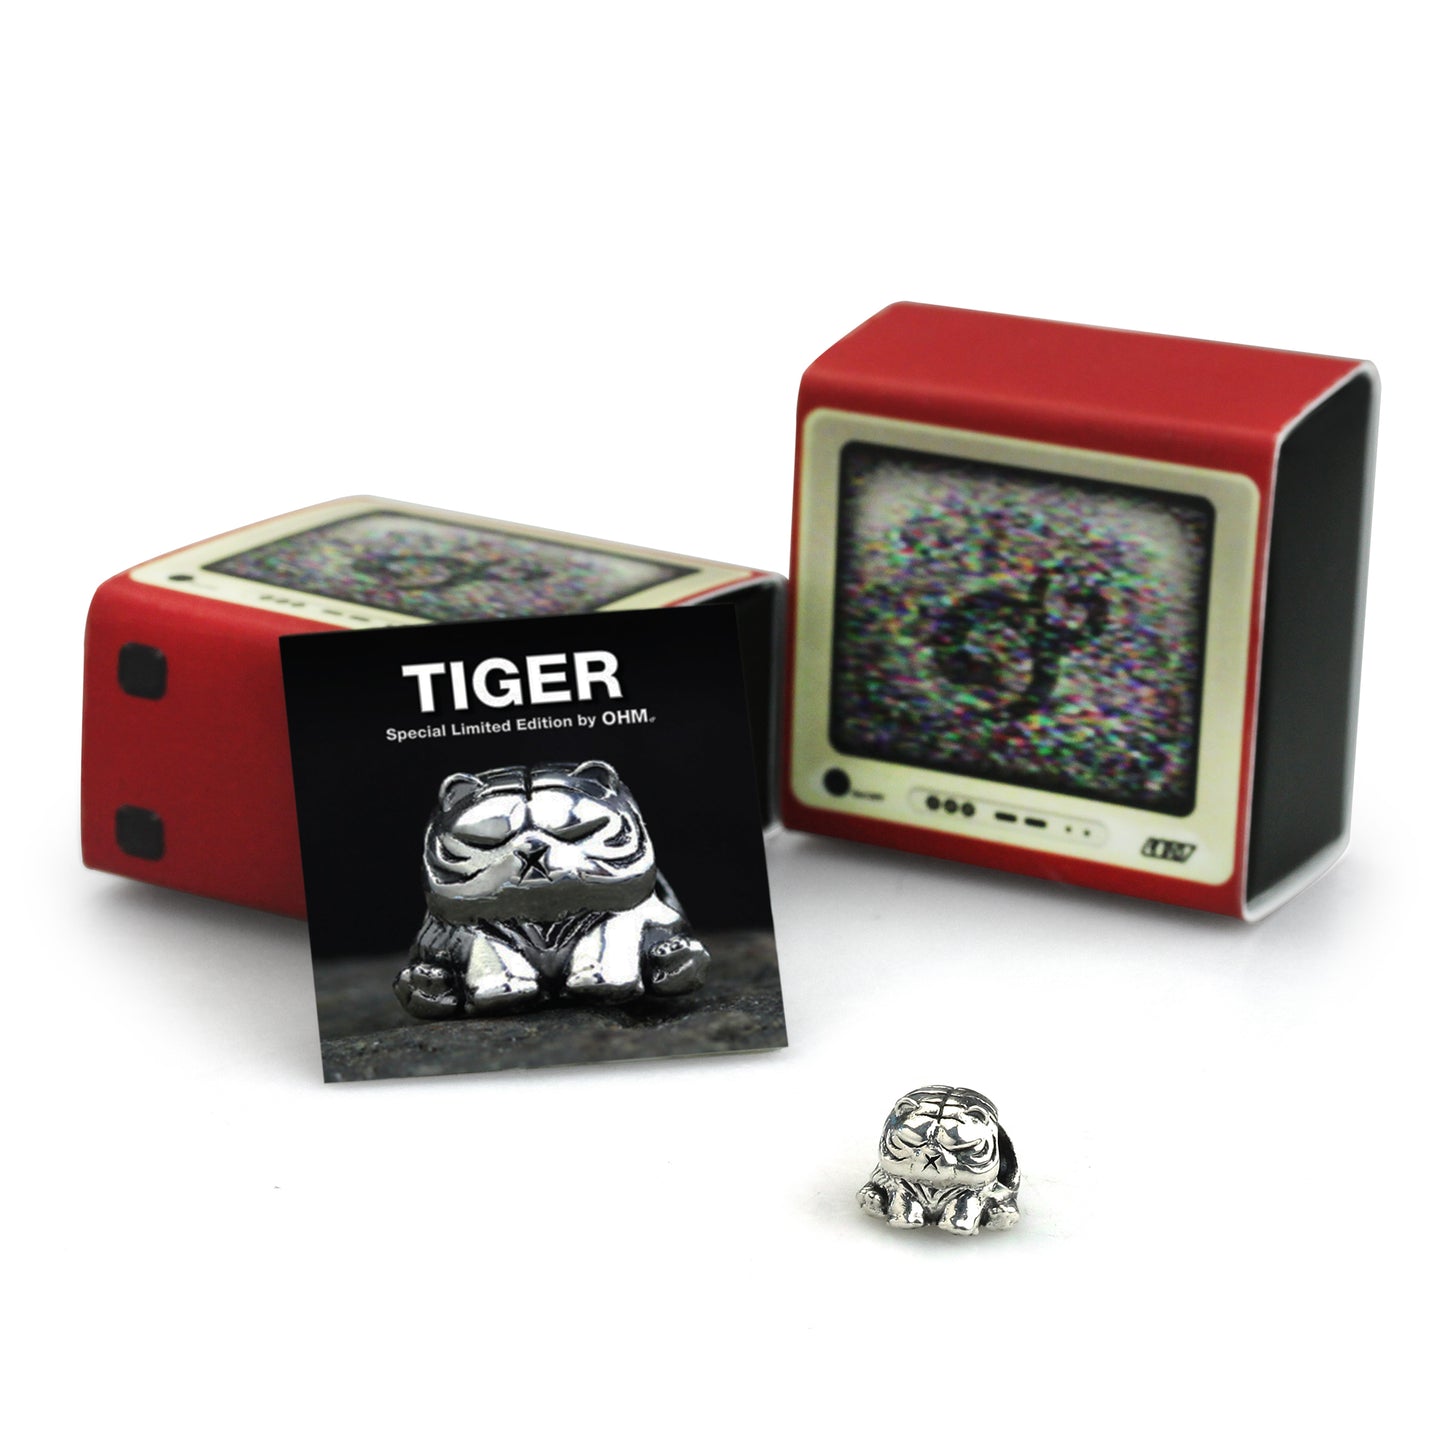 Tiger - Limited Edition